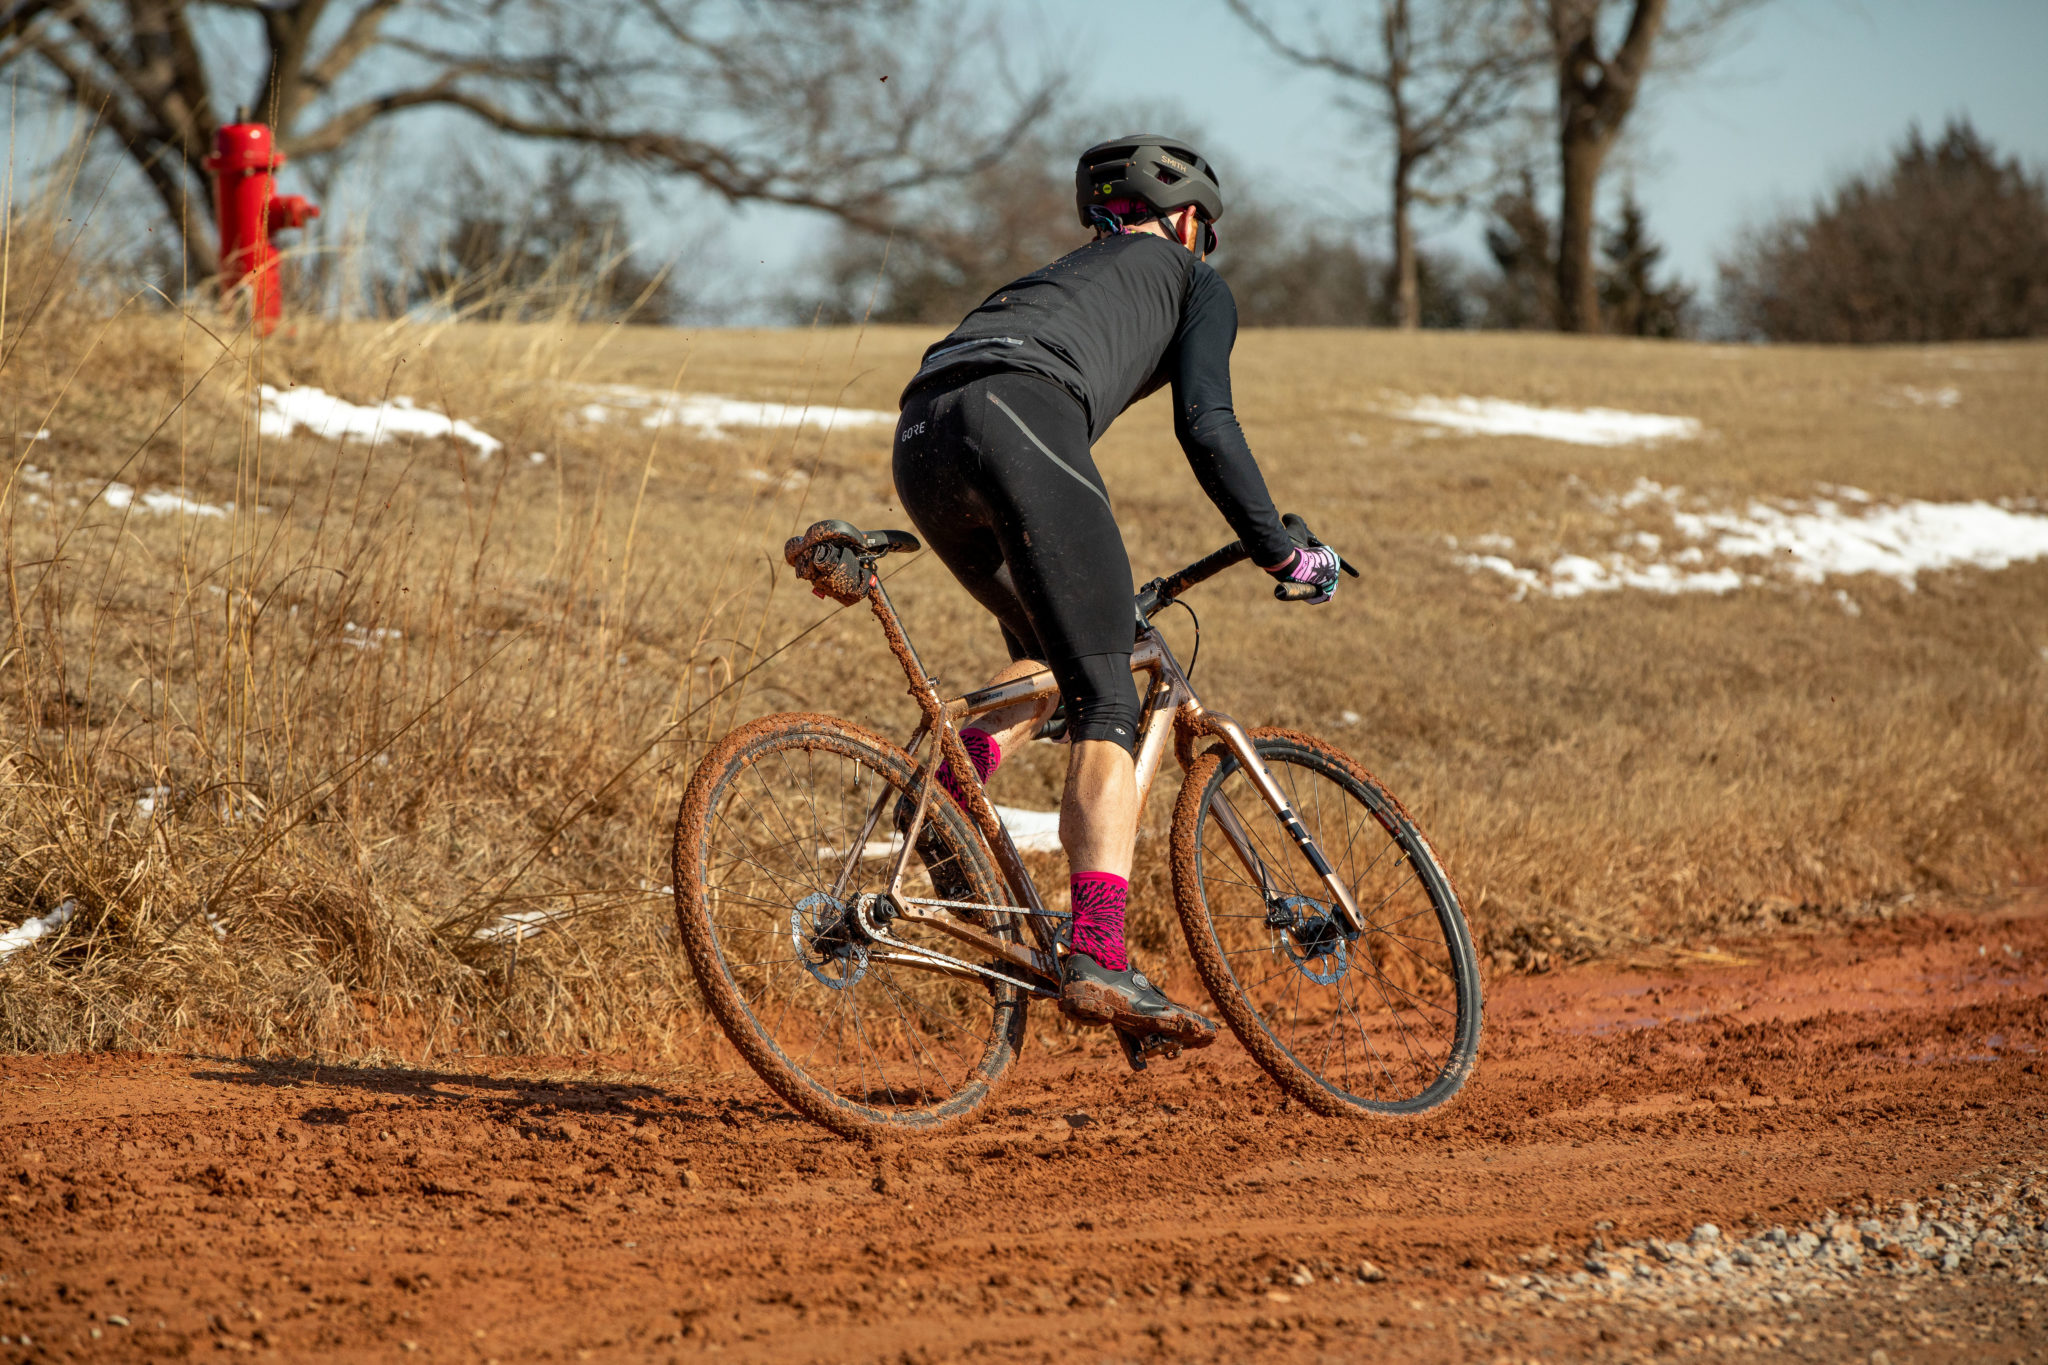 New Salsa Stormchaser debuts at Midsouth Gravel race ADVNTR.cc